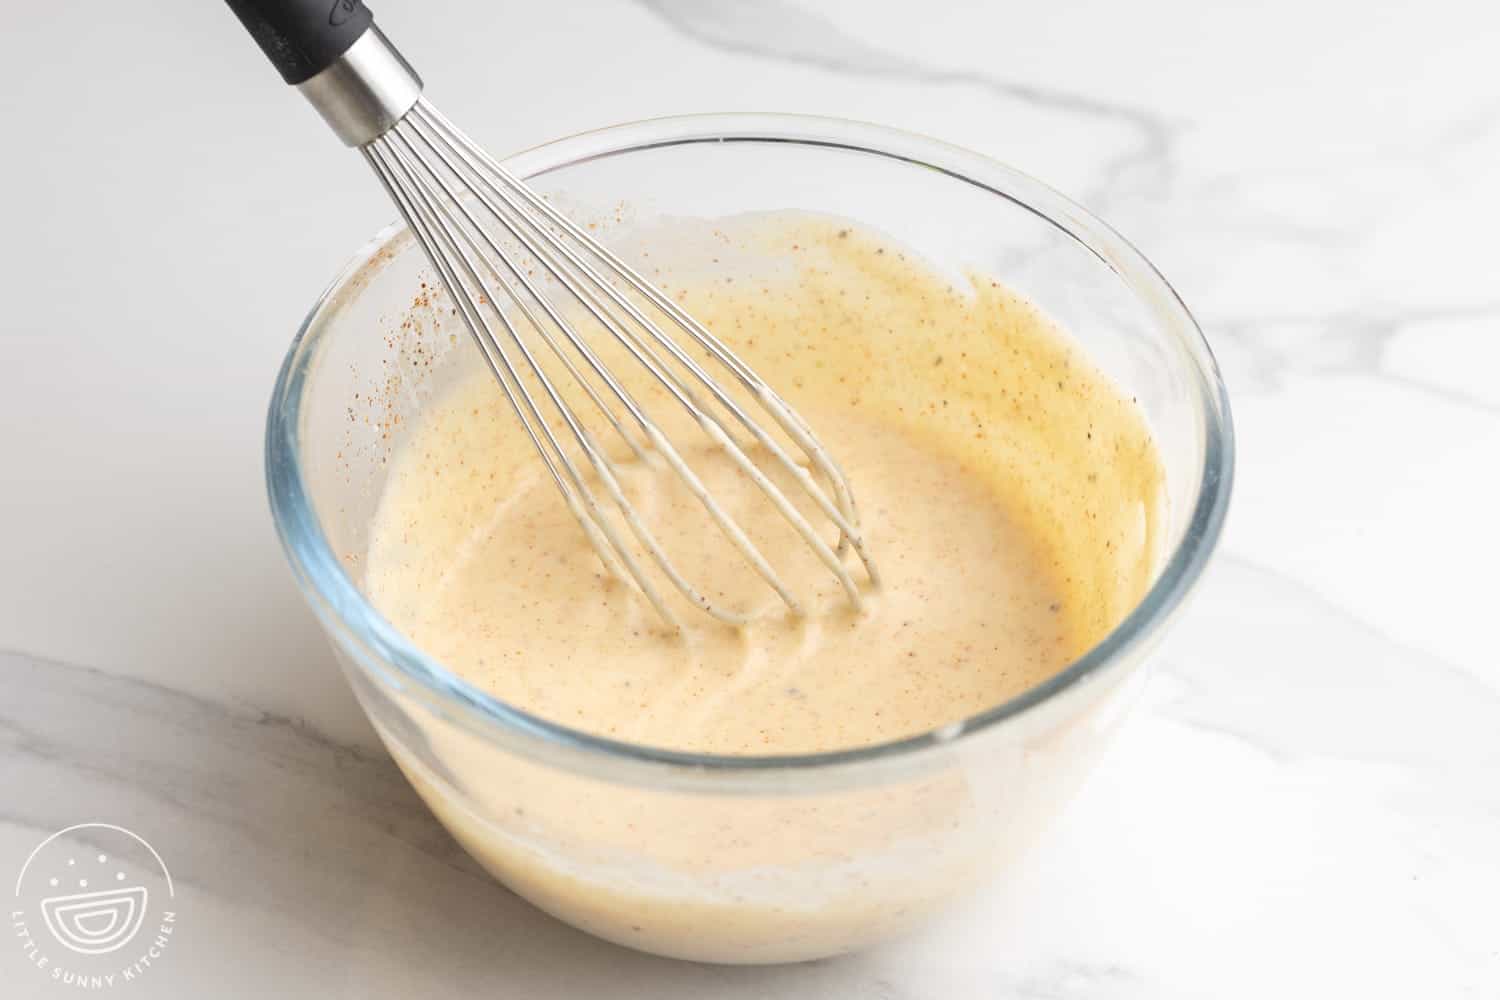 homemade chef salad dressing in a small glass bowl with a whisk.